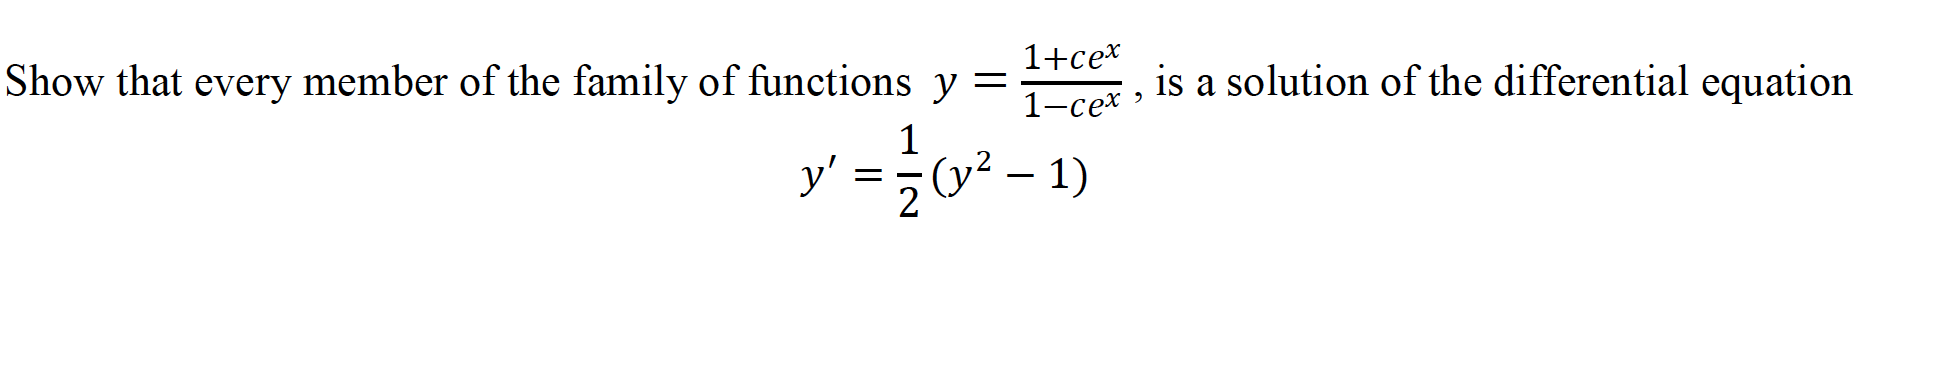 1+cex
Show that every member of the family of functions y =
is a solution of the differential equation
1-сех »
1
(y² – 1)
y'
2
-
